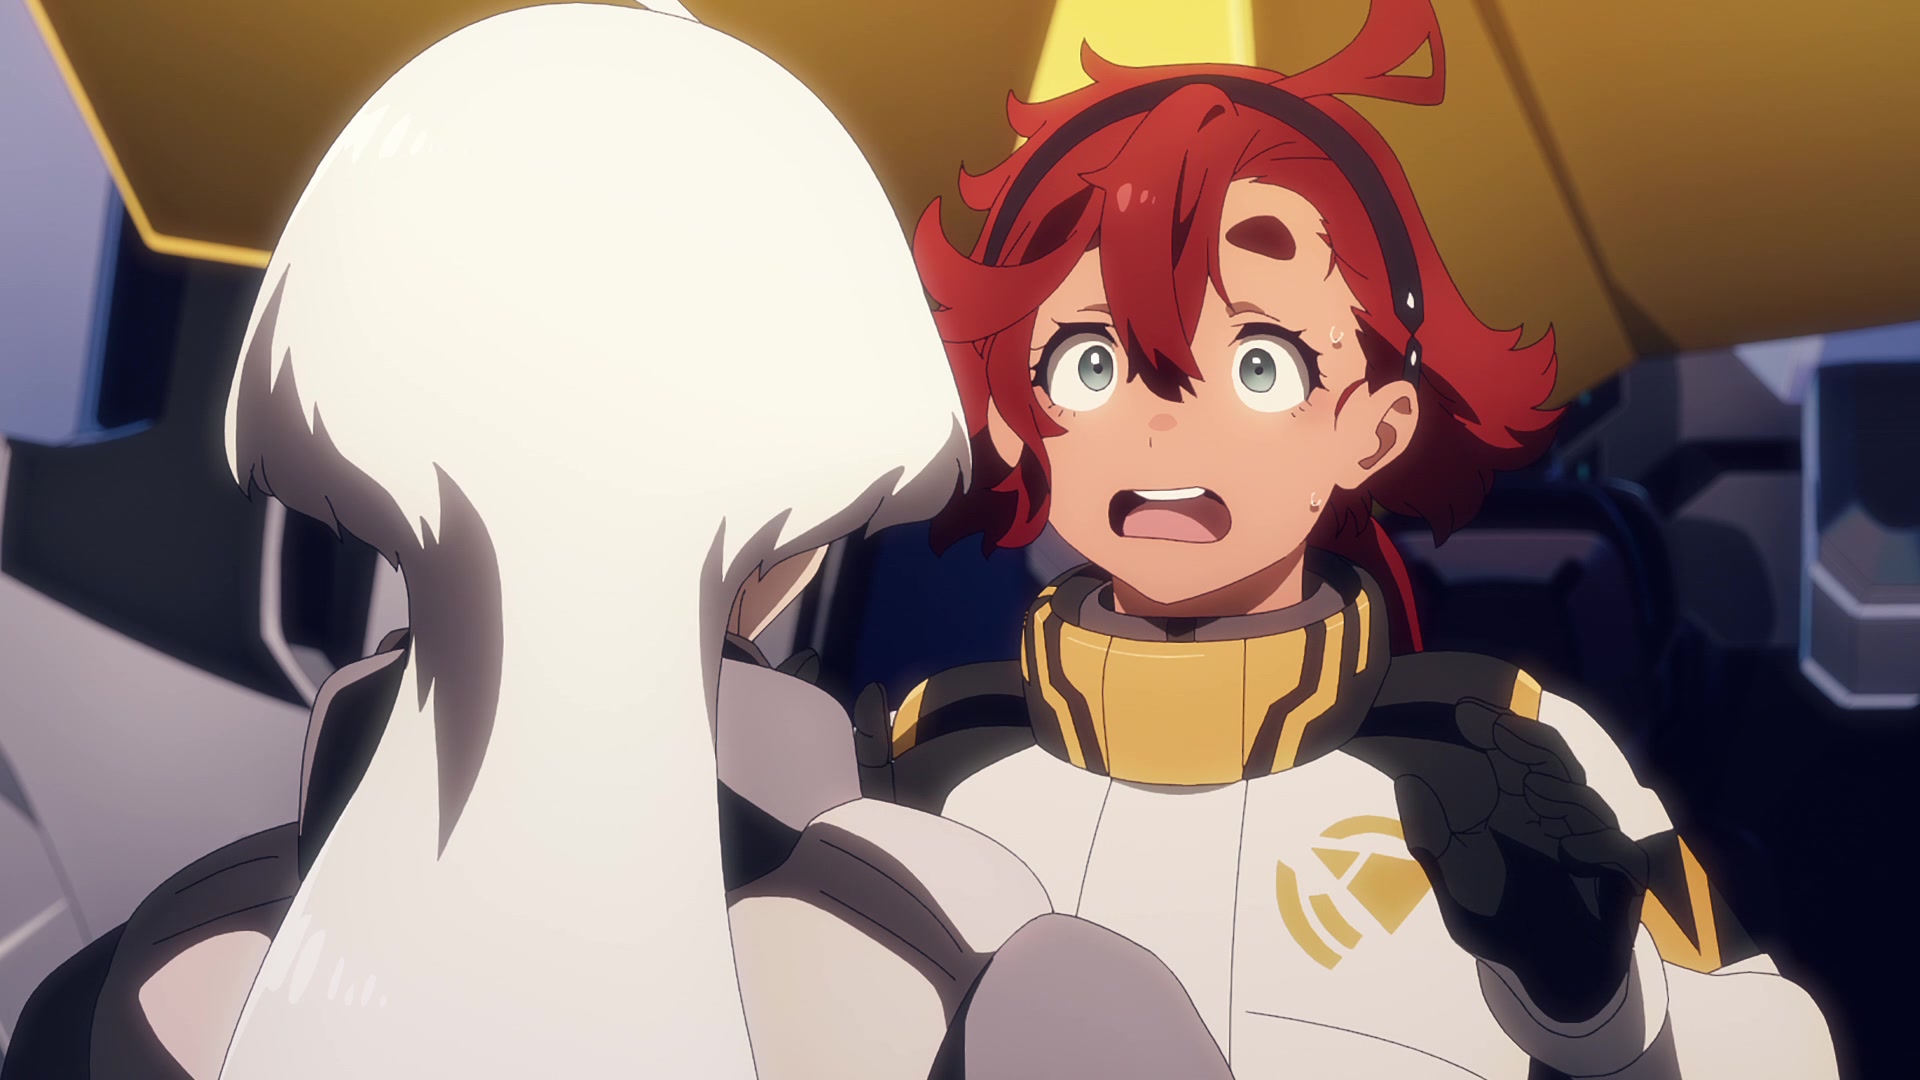 Suletta (Kana Ichinose) is surprised by Miorine's 'marriage proposal' in Mobile Suit Gundam: The Witch From Mercury Episode 2 "The Witch and the Bride" (2022), Bandai Namco Filmworks